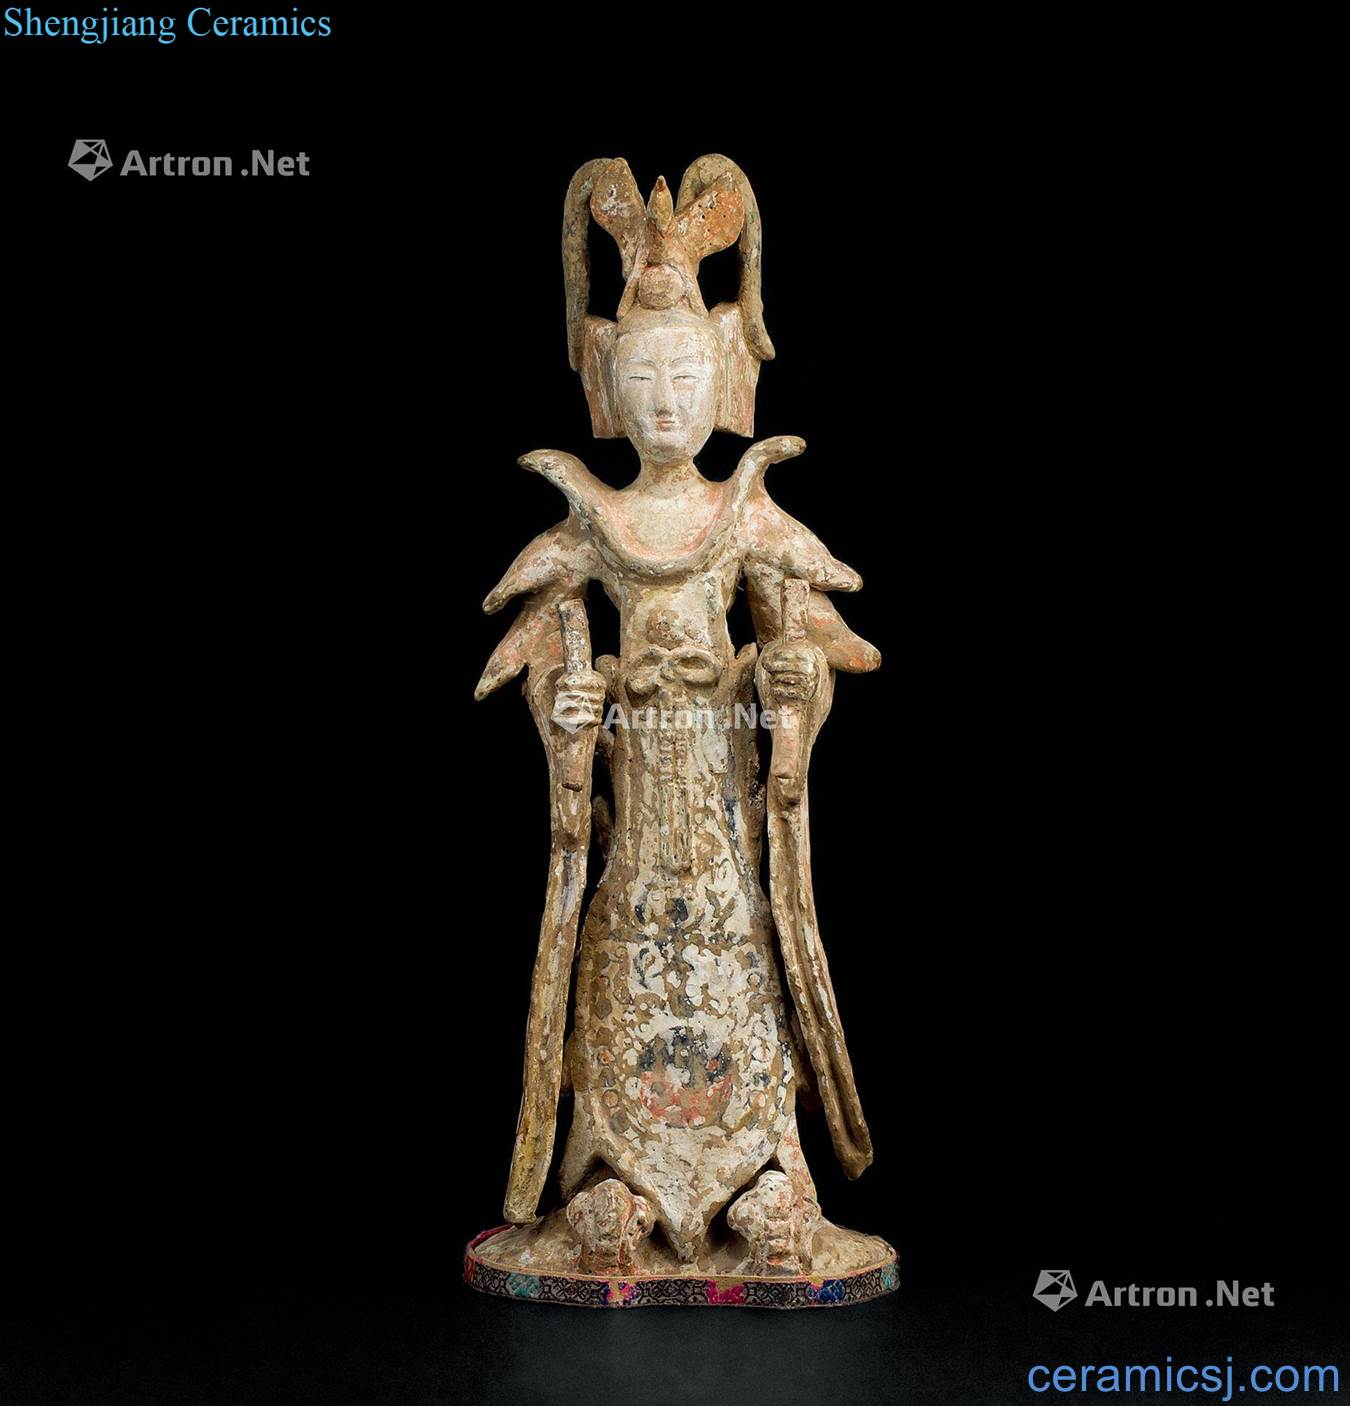 However, northern wei dynasty (386 ~ 534) painted pottery figurines